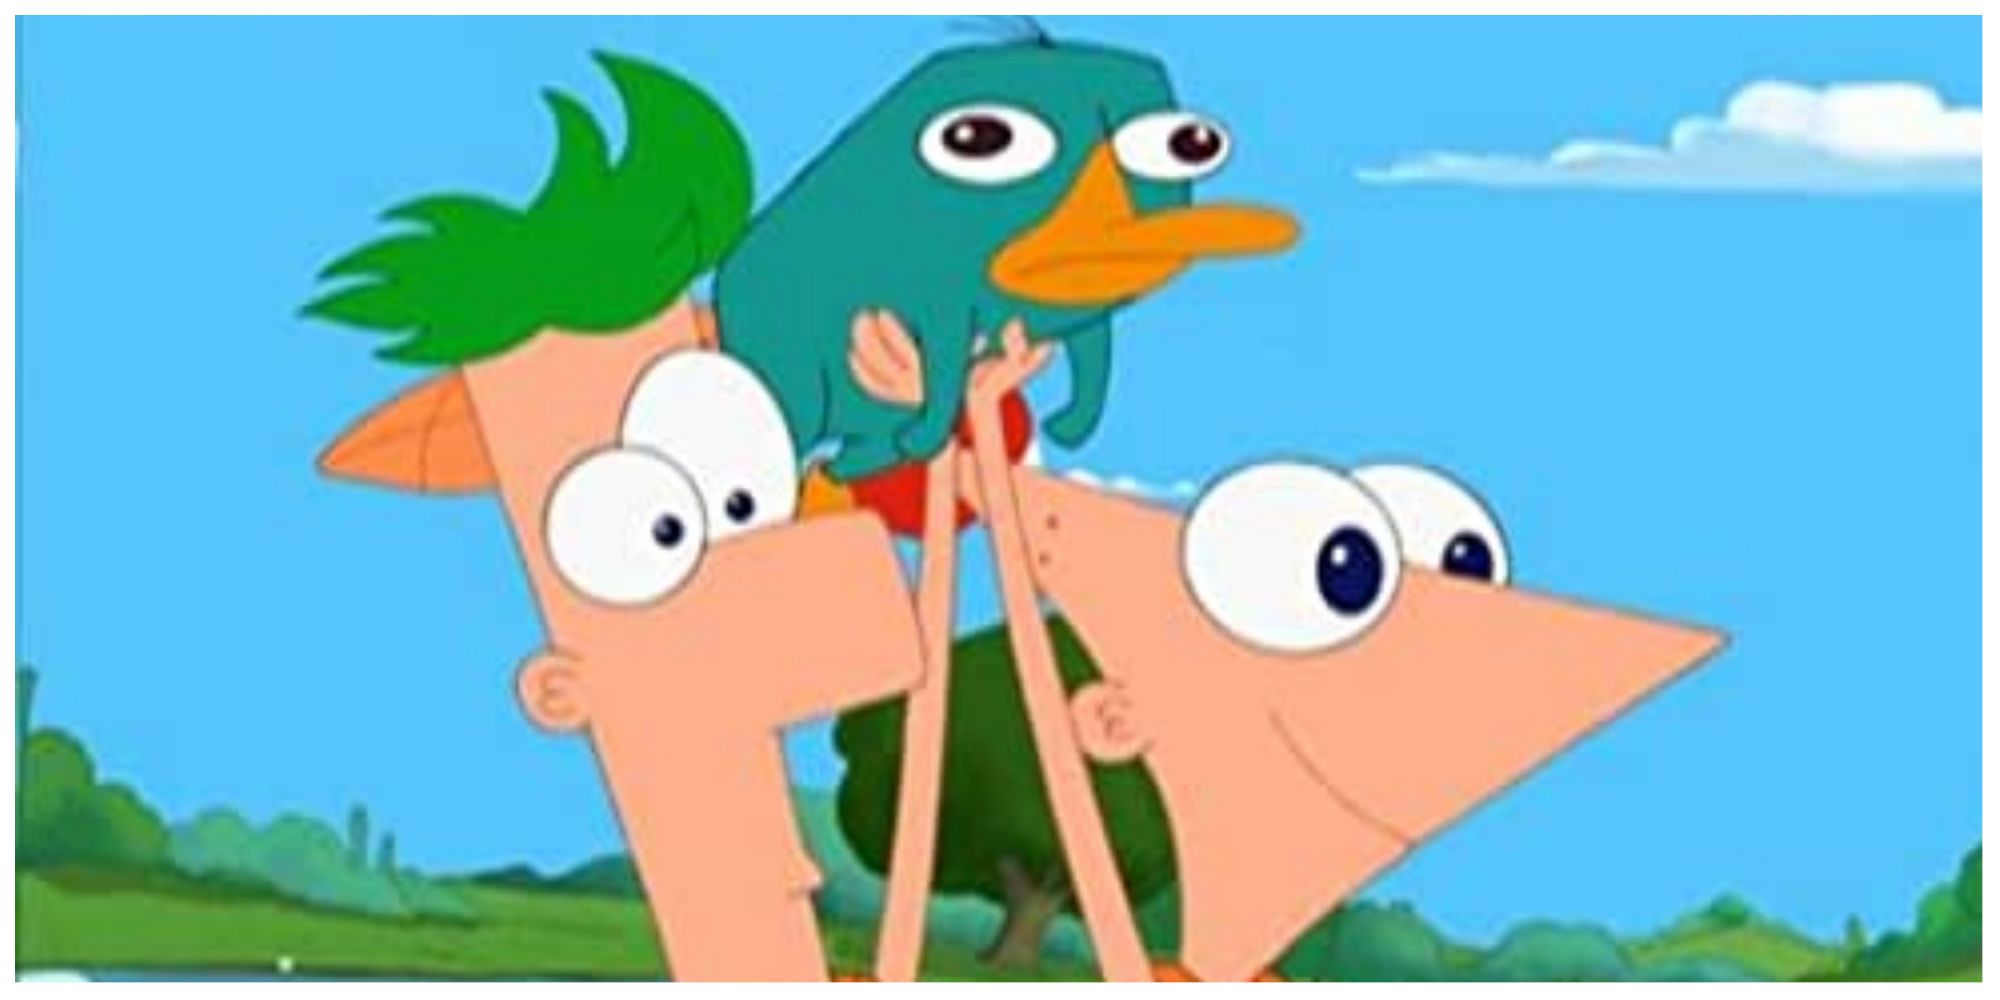 Phineas, Ferb, carrying Perry the Platypus in the show Phineas and Ferb.